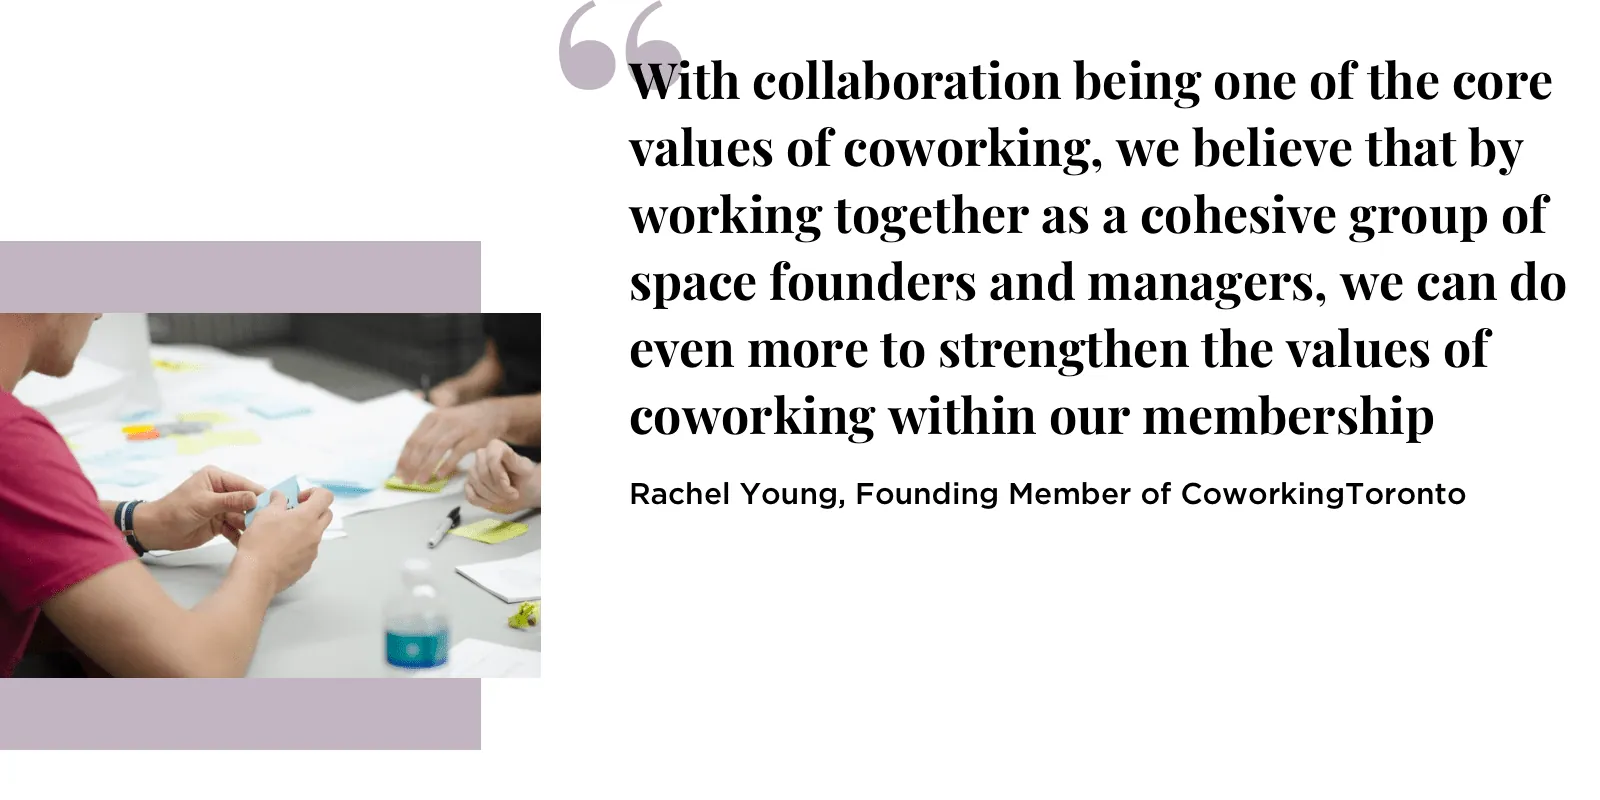 Future of work - Evolving with the coworking industry